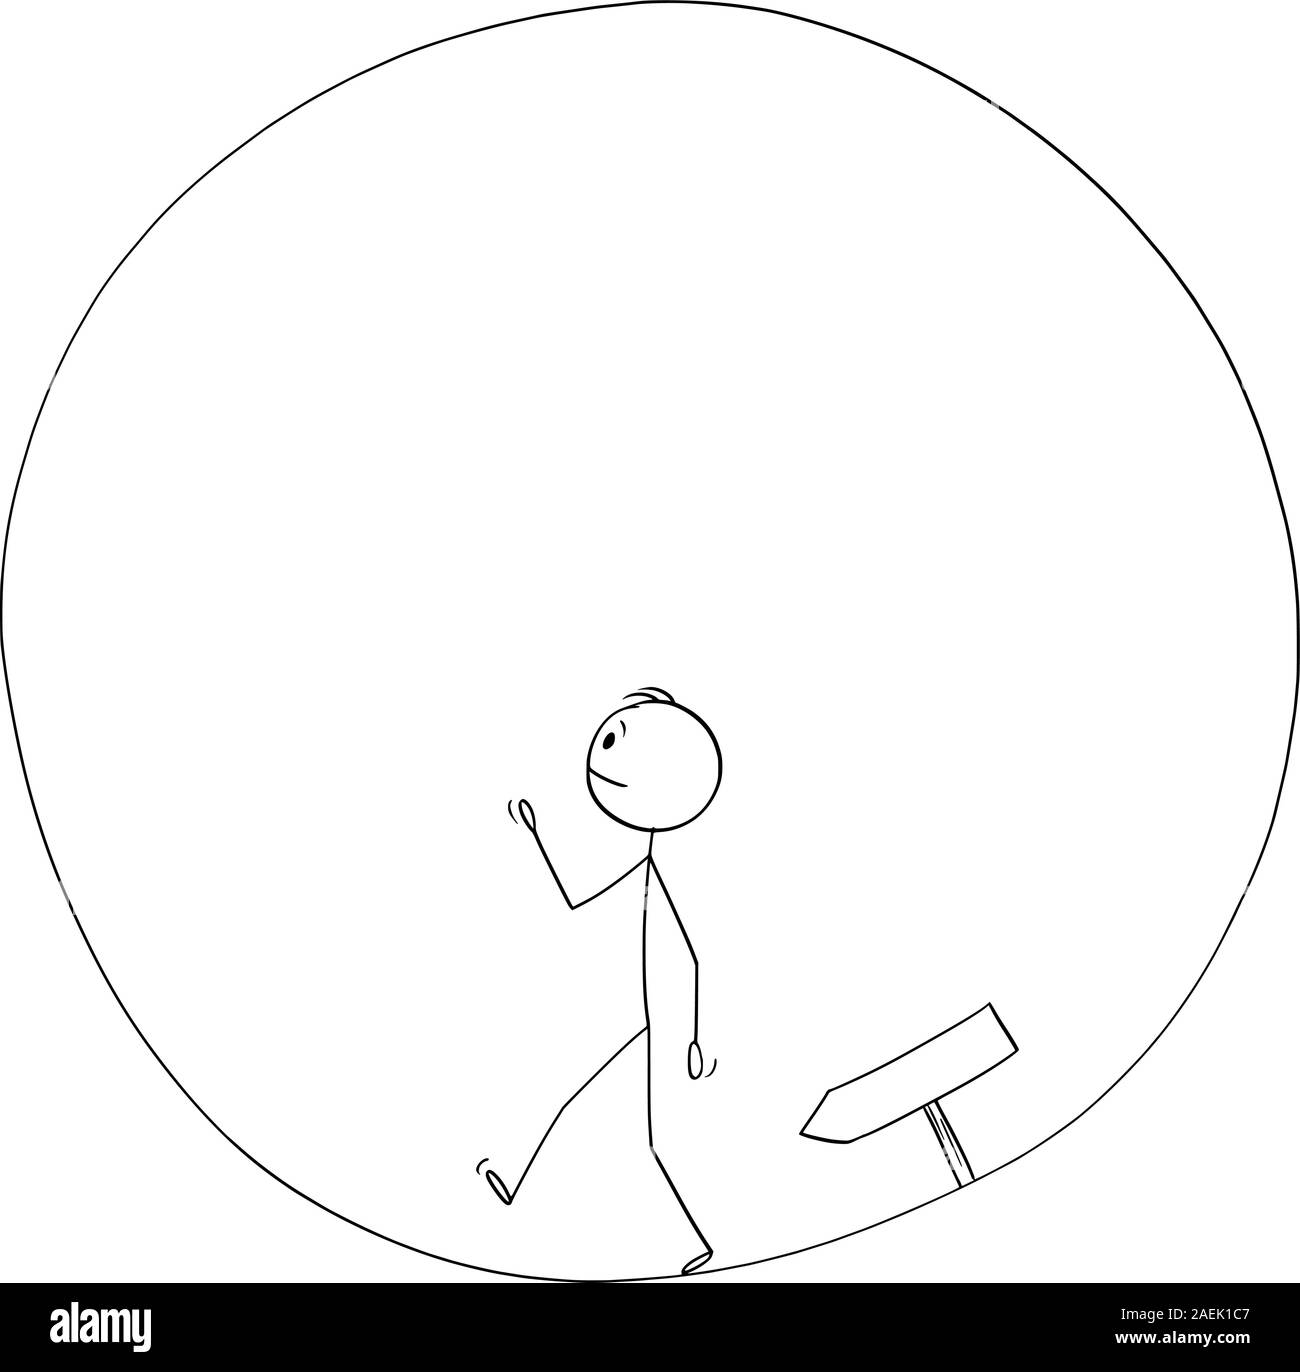 Vector cartoon stick figure drawing conceptual illustration of man or businessman walking in circle. Business concept of career, success and challenge. Stock Vector